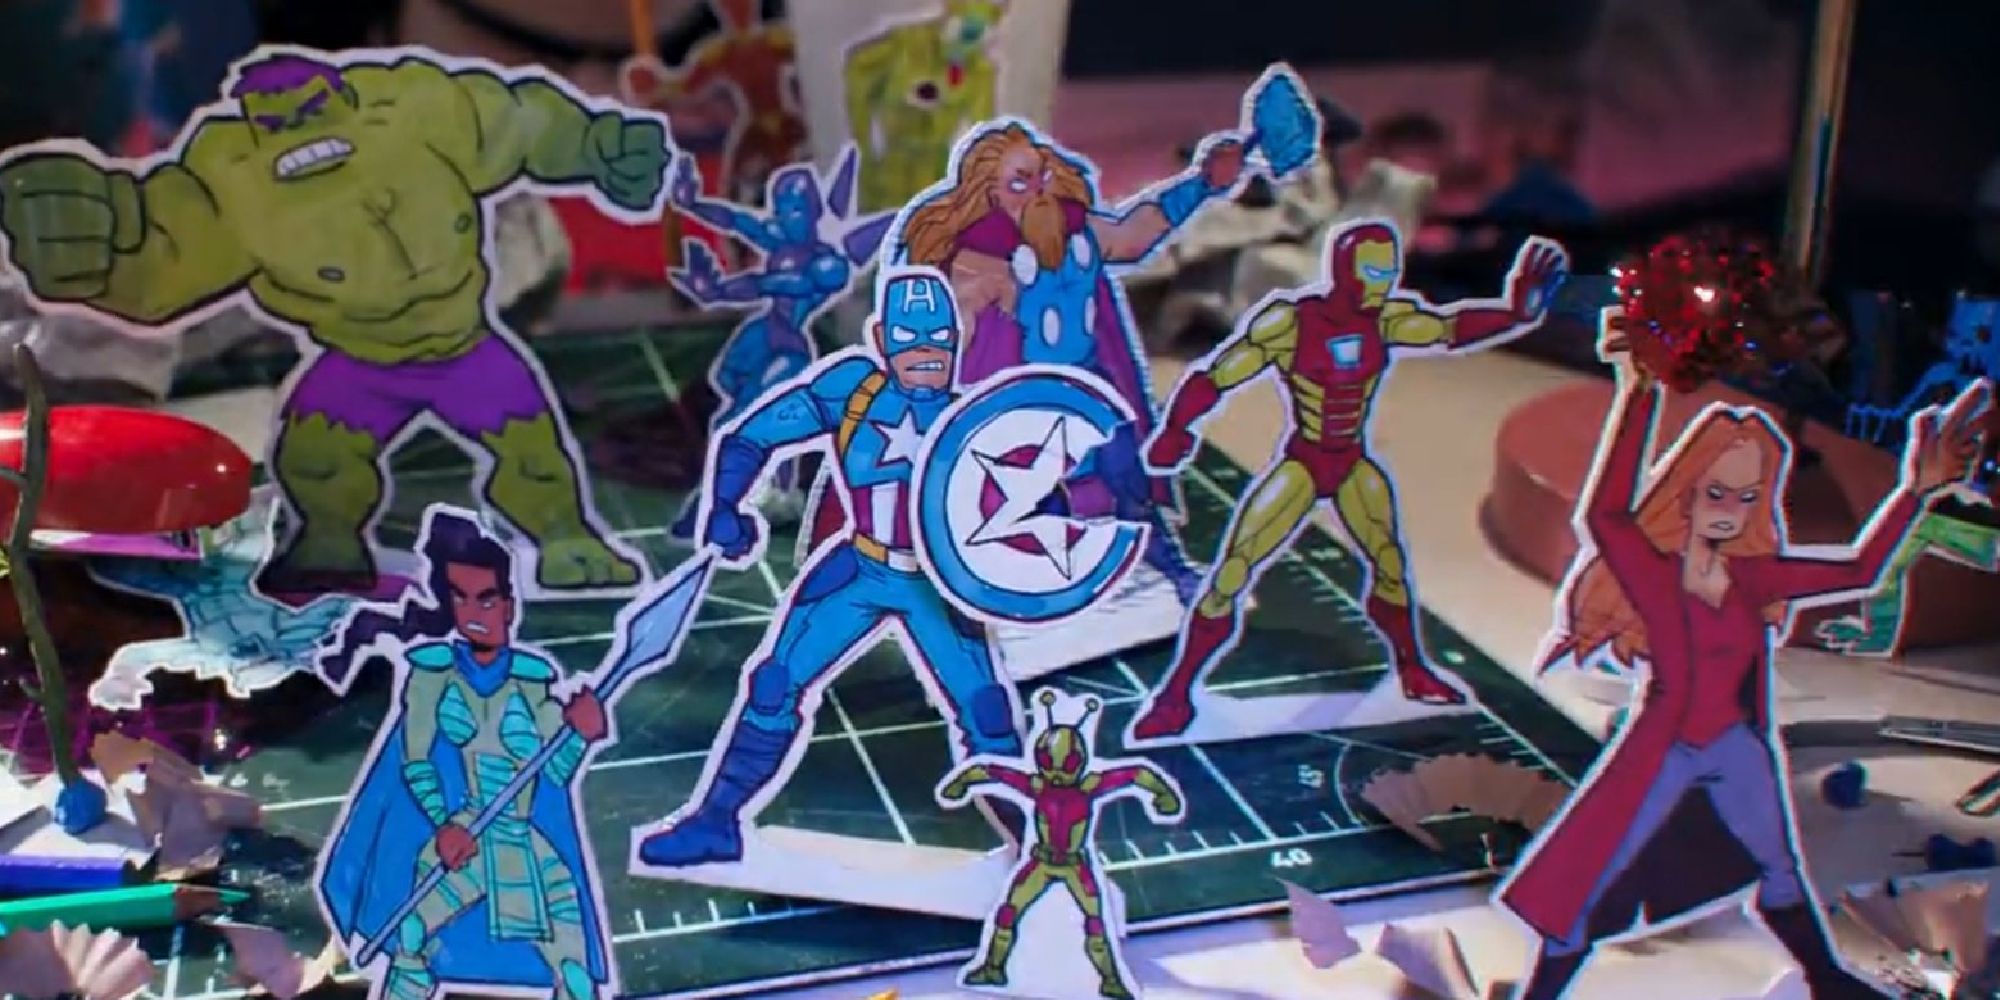 A drawn re-enactment of the Endgame battle with Captain America, Iron Man, Scarlet Witch, Valkyrie, Hulk, Ant Man, Thor, and Rescue